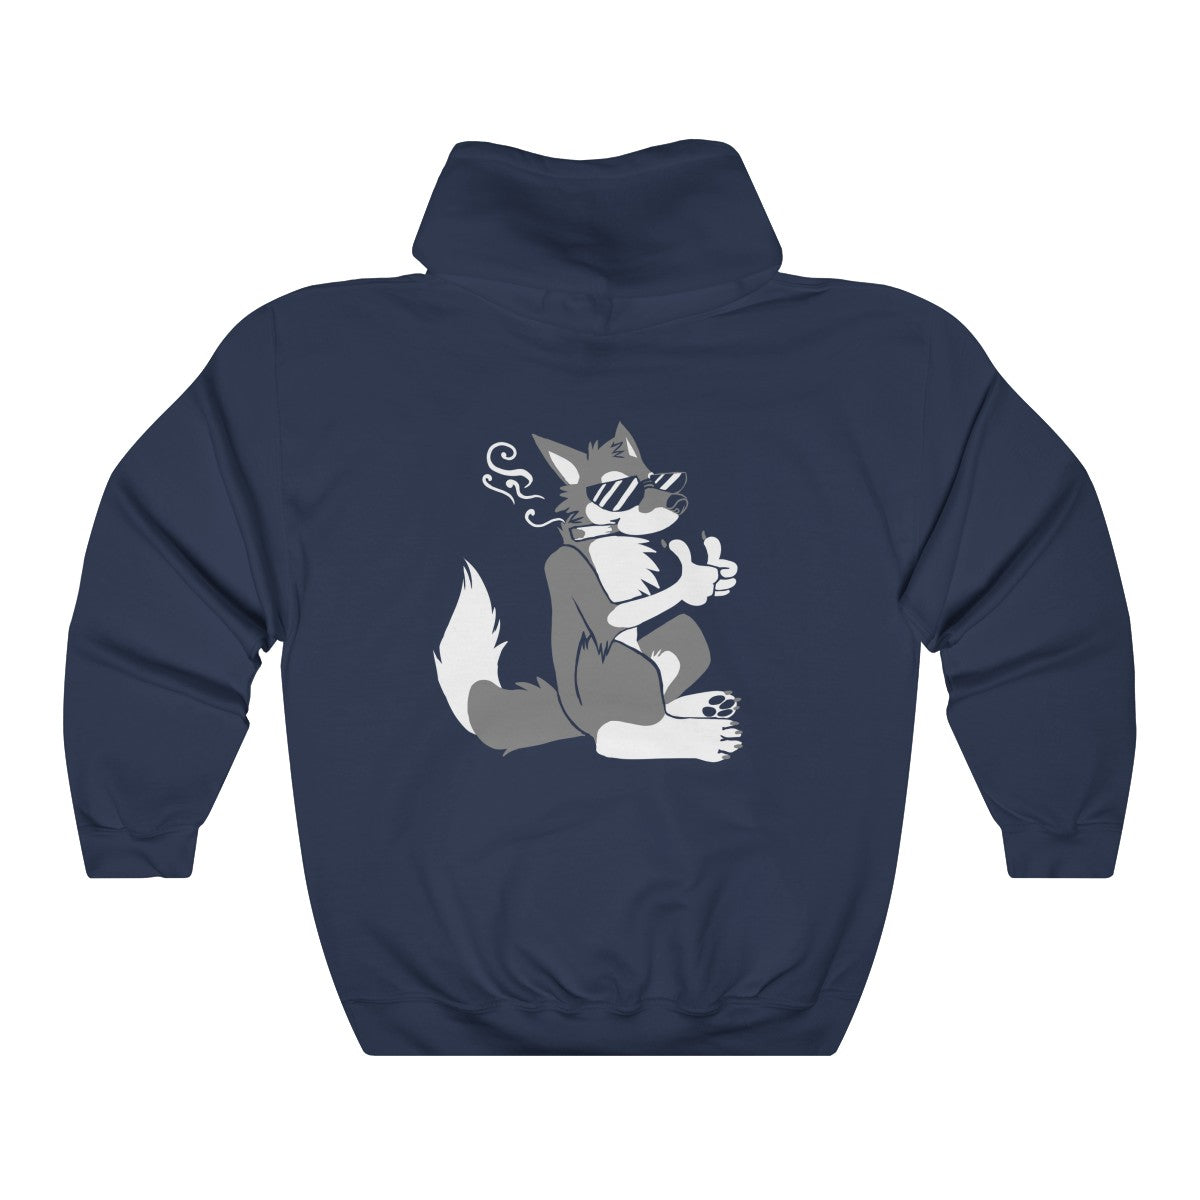 Chill Out - Hoodie Hoodie Dire Creatures Navy Blue S 